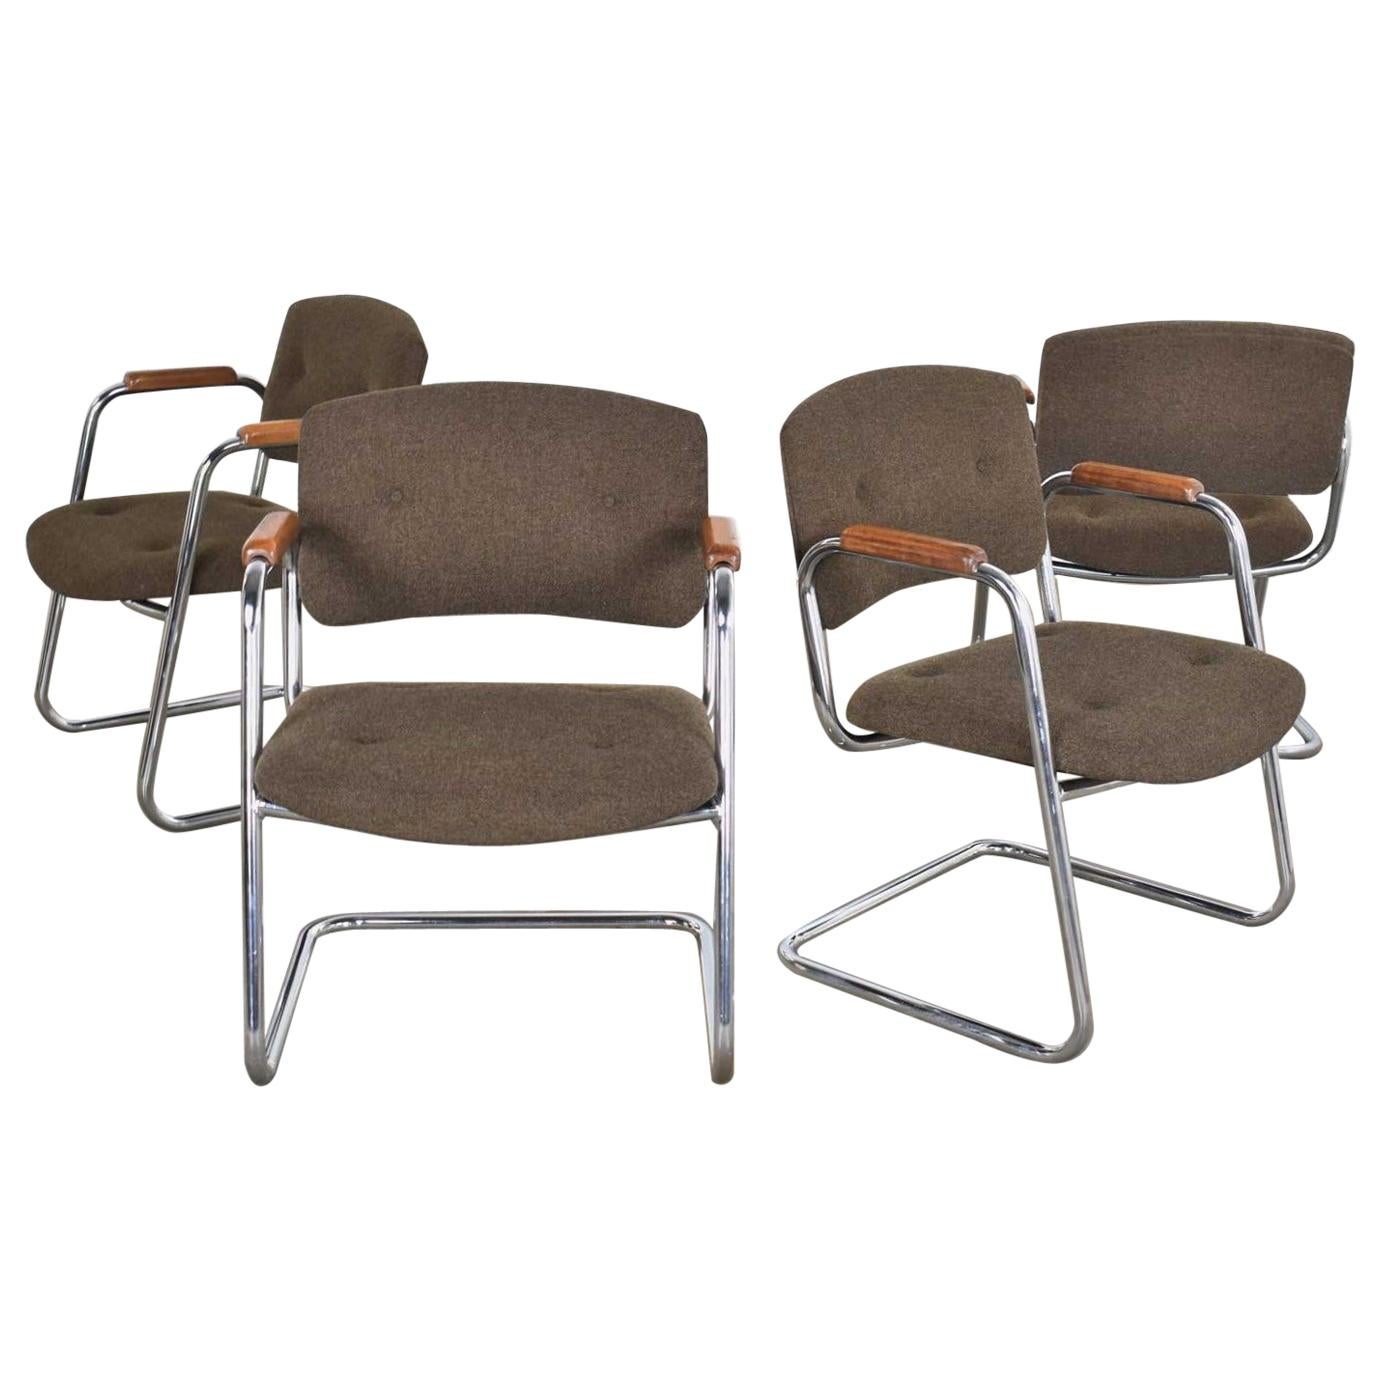 4 Cantilever Armchairs Chrome Brown w/ Wood Arms Style of Steelcase or Pollock